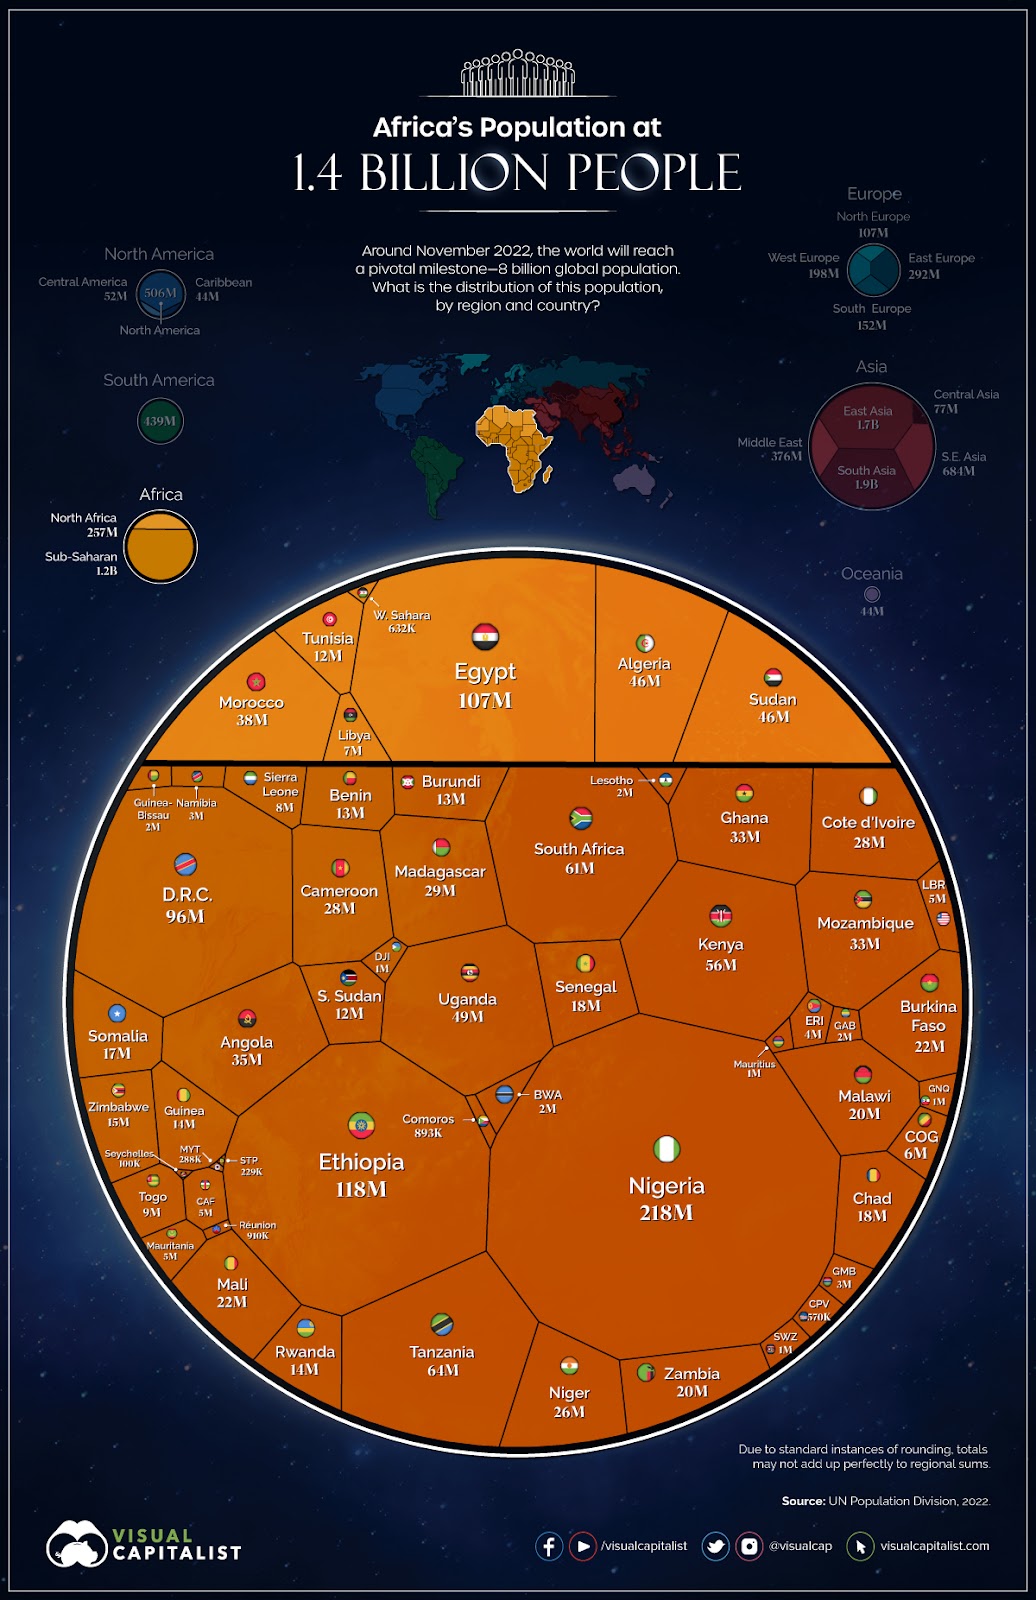 Data visualization showing a population breakdown of African countries in 2022